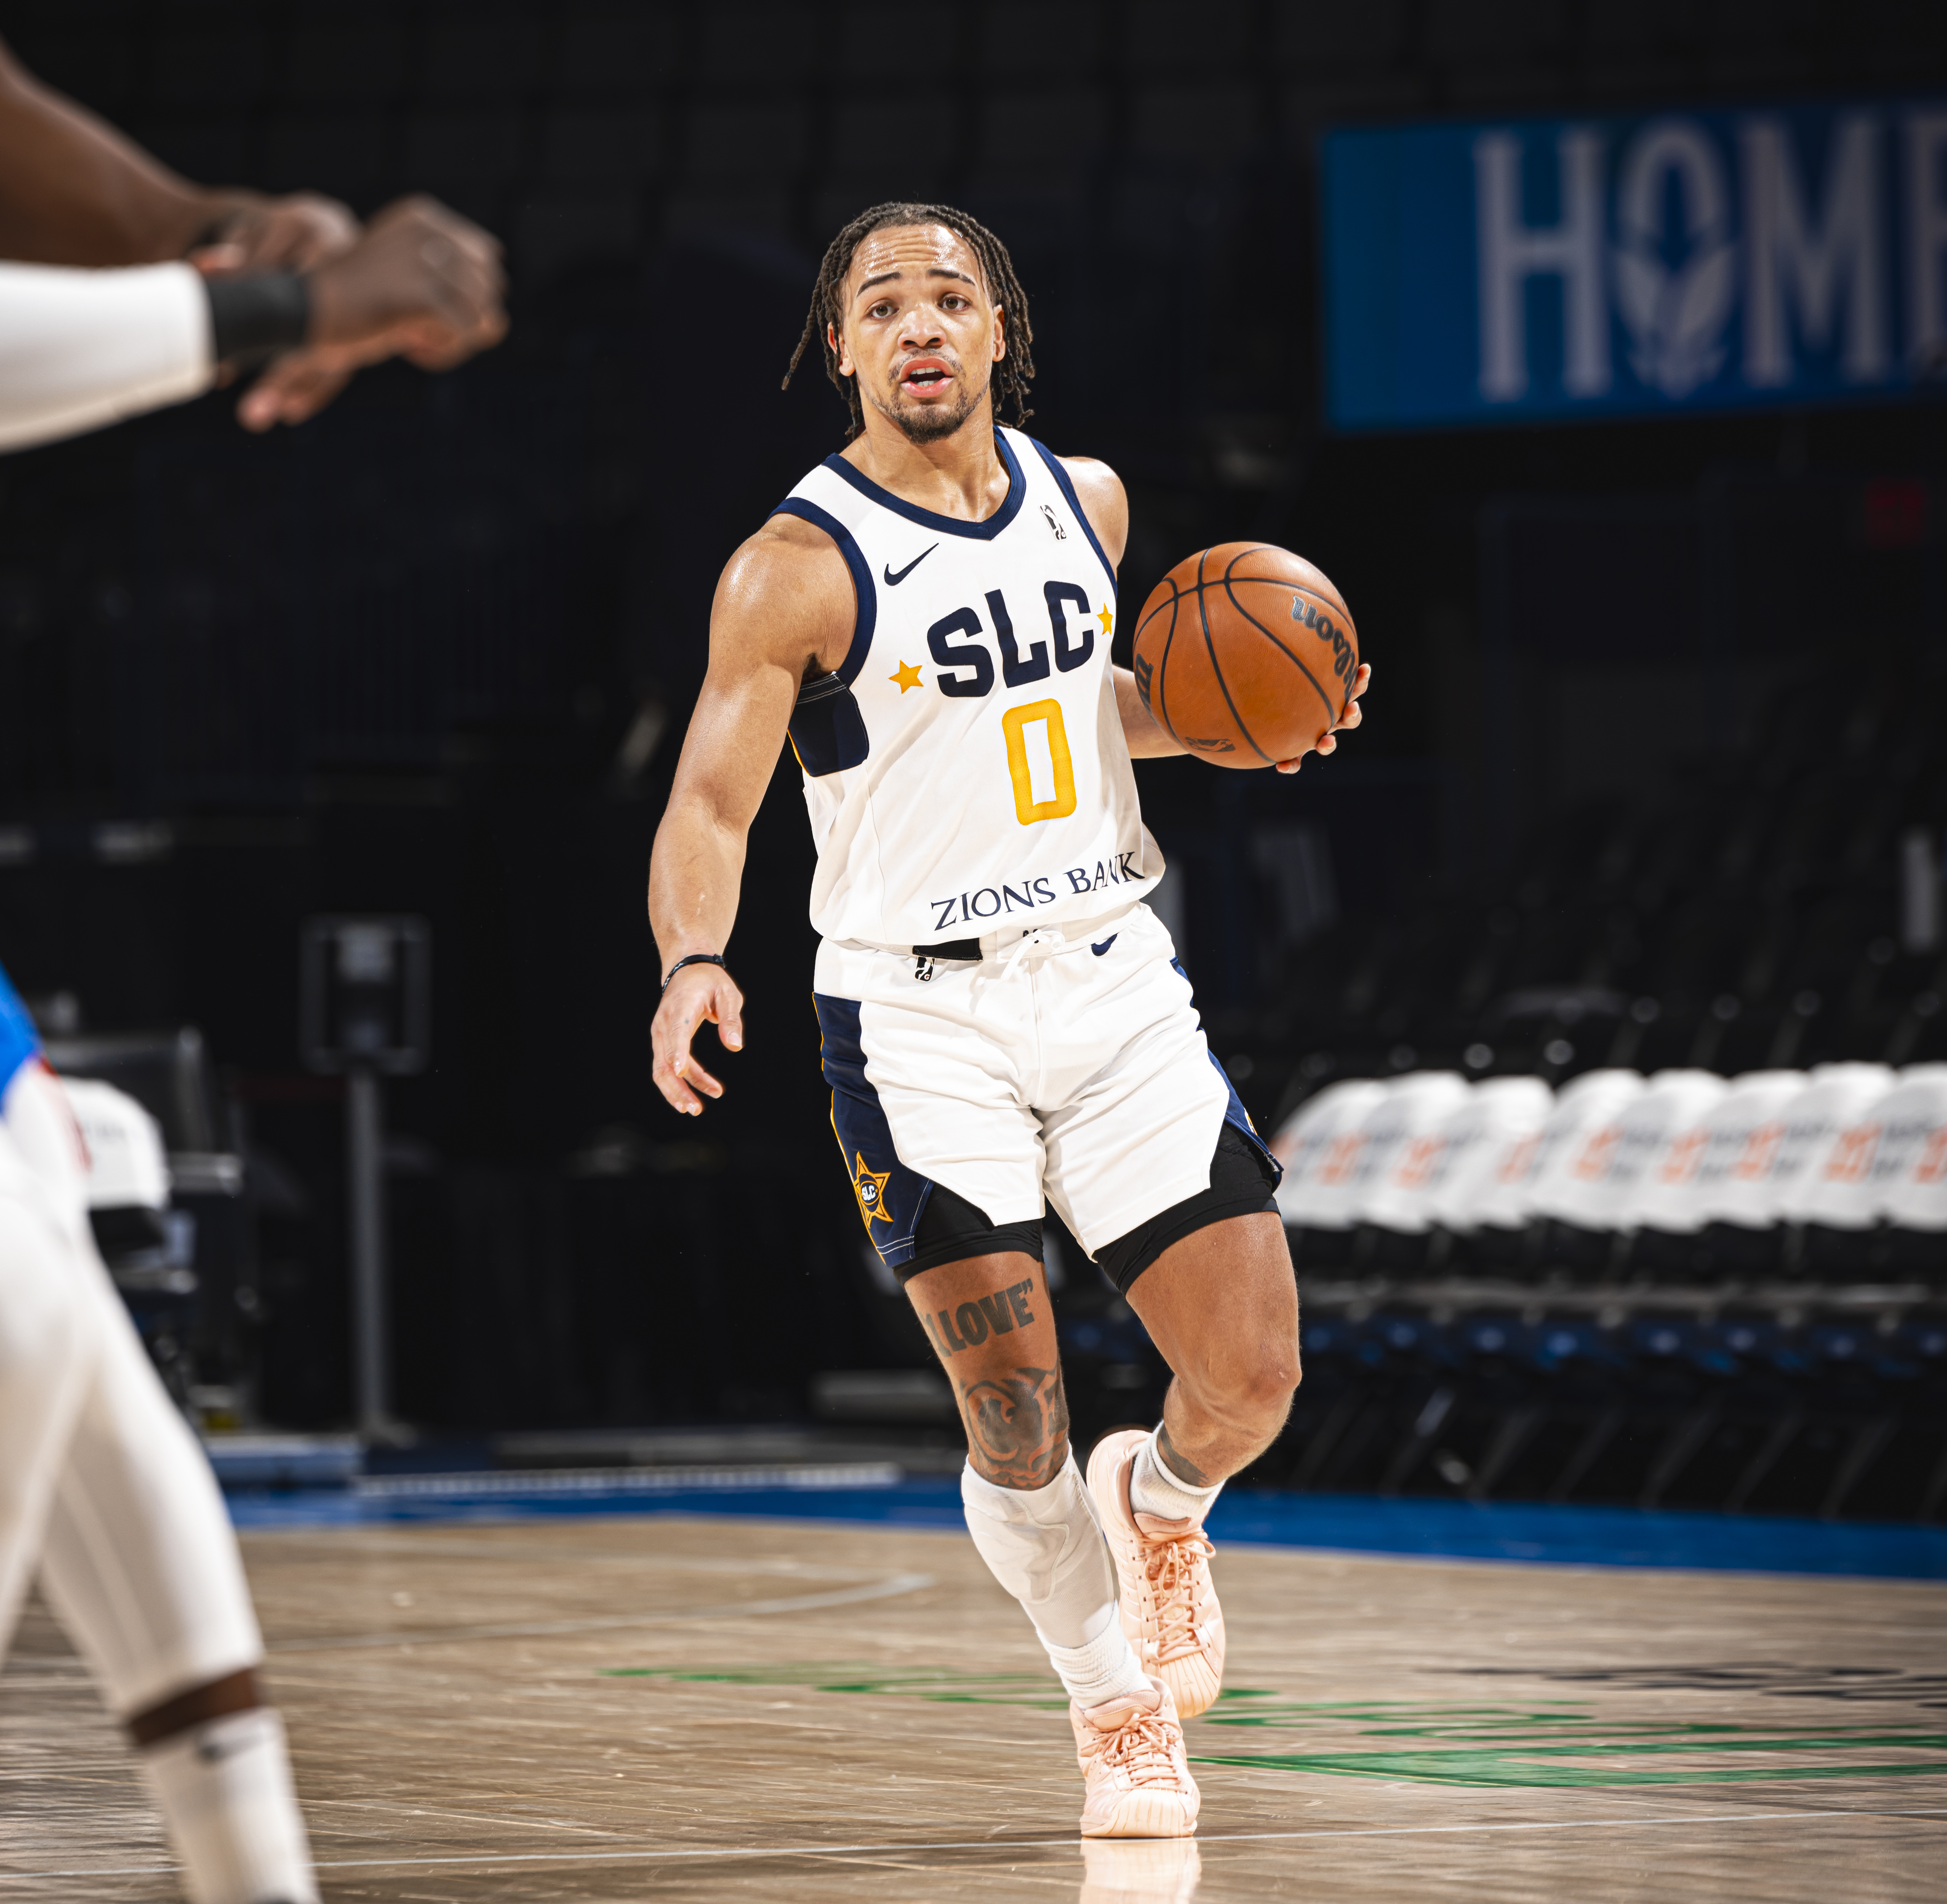 NBA Rumors: Pistons Sign Former Celtic Carsen Edwards to Contract from G League